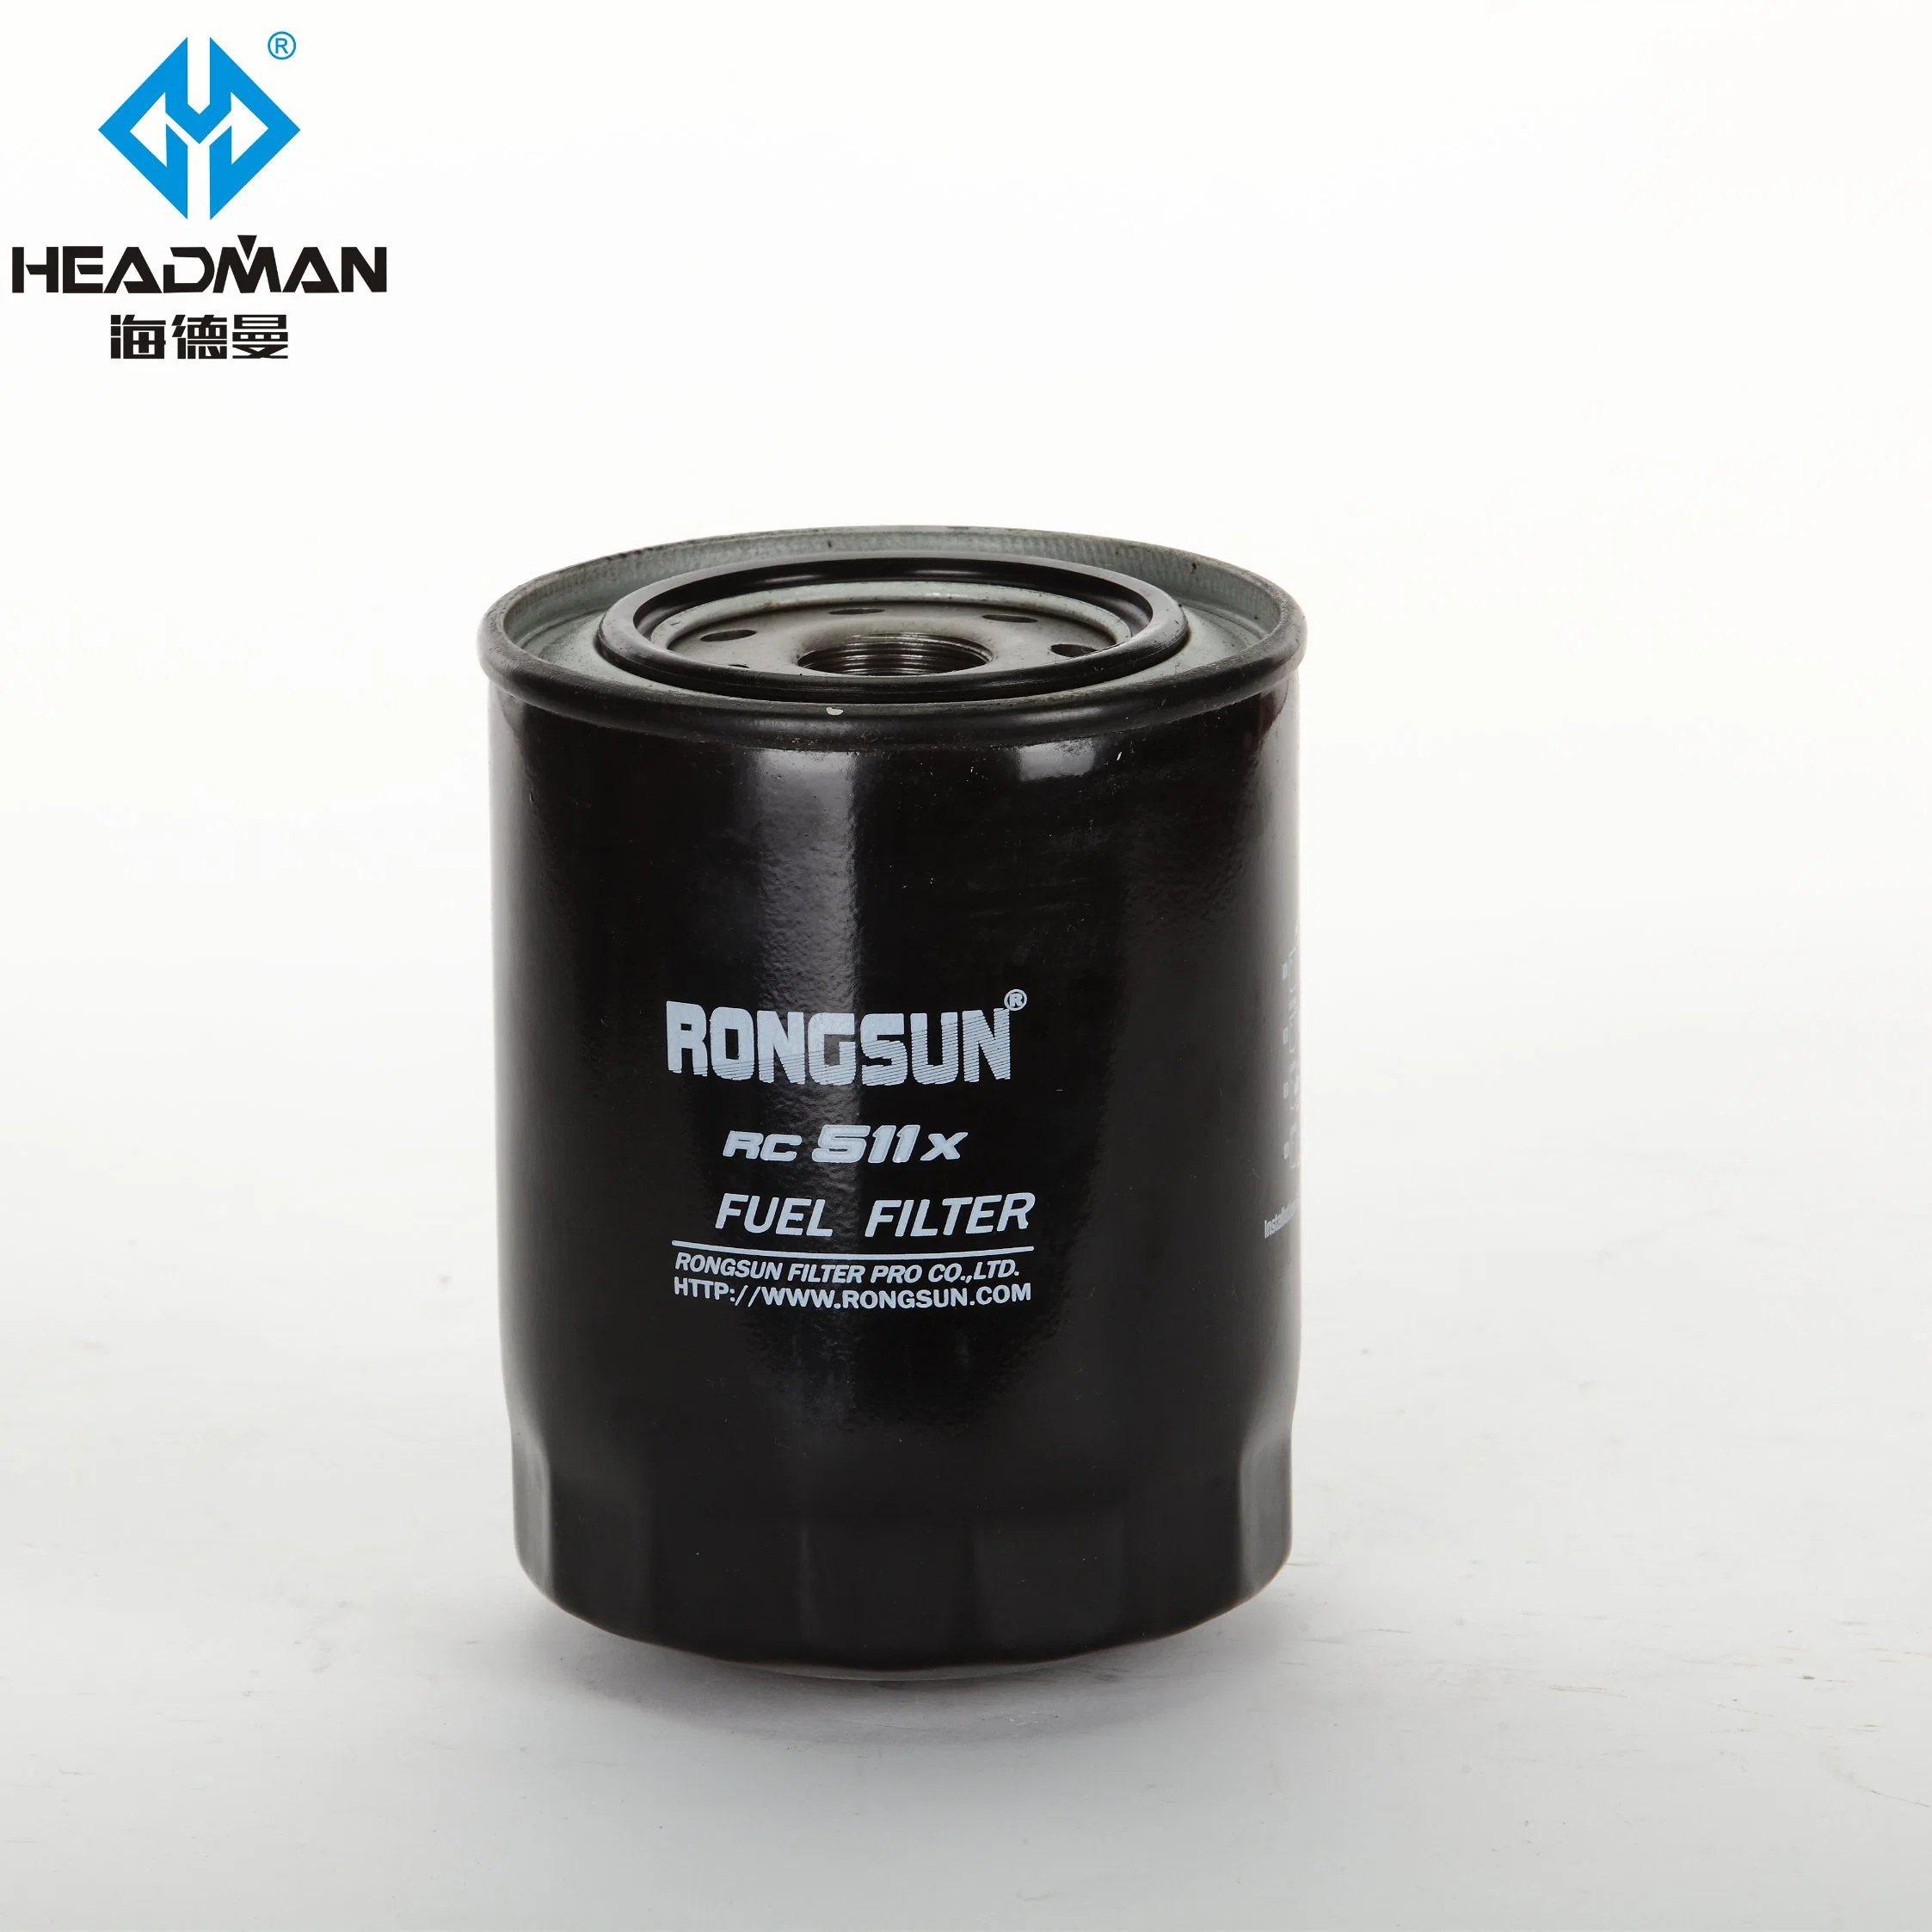 Hot Selling Truck Parts 2656f843 Fuel Filters Construction Machinery Accessories P557440 Bf970 600-311-8293